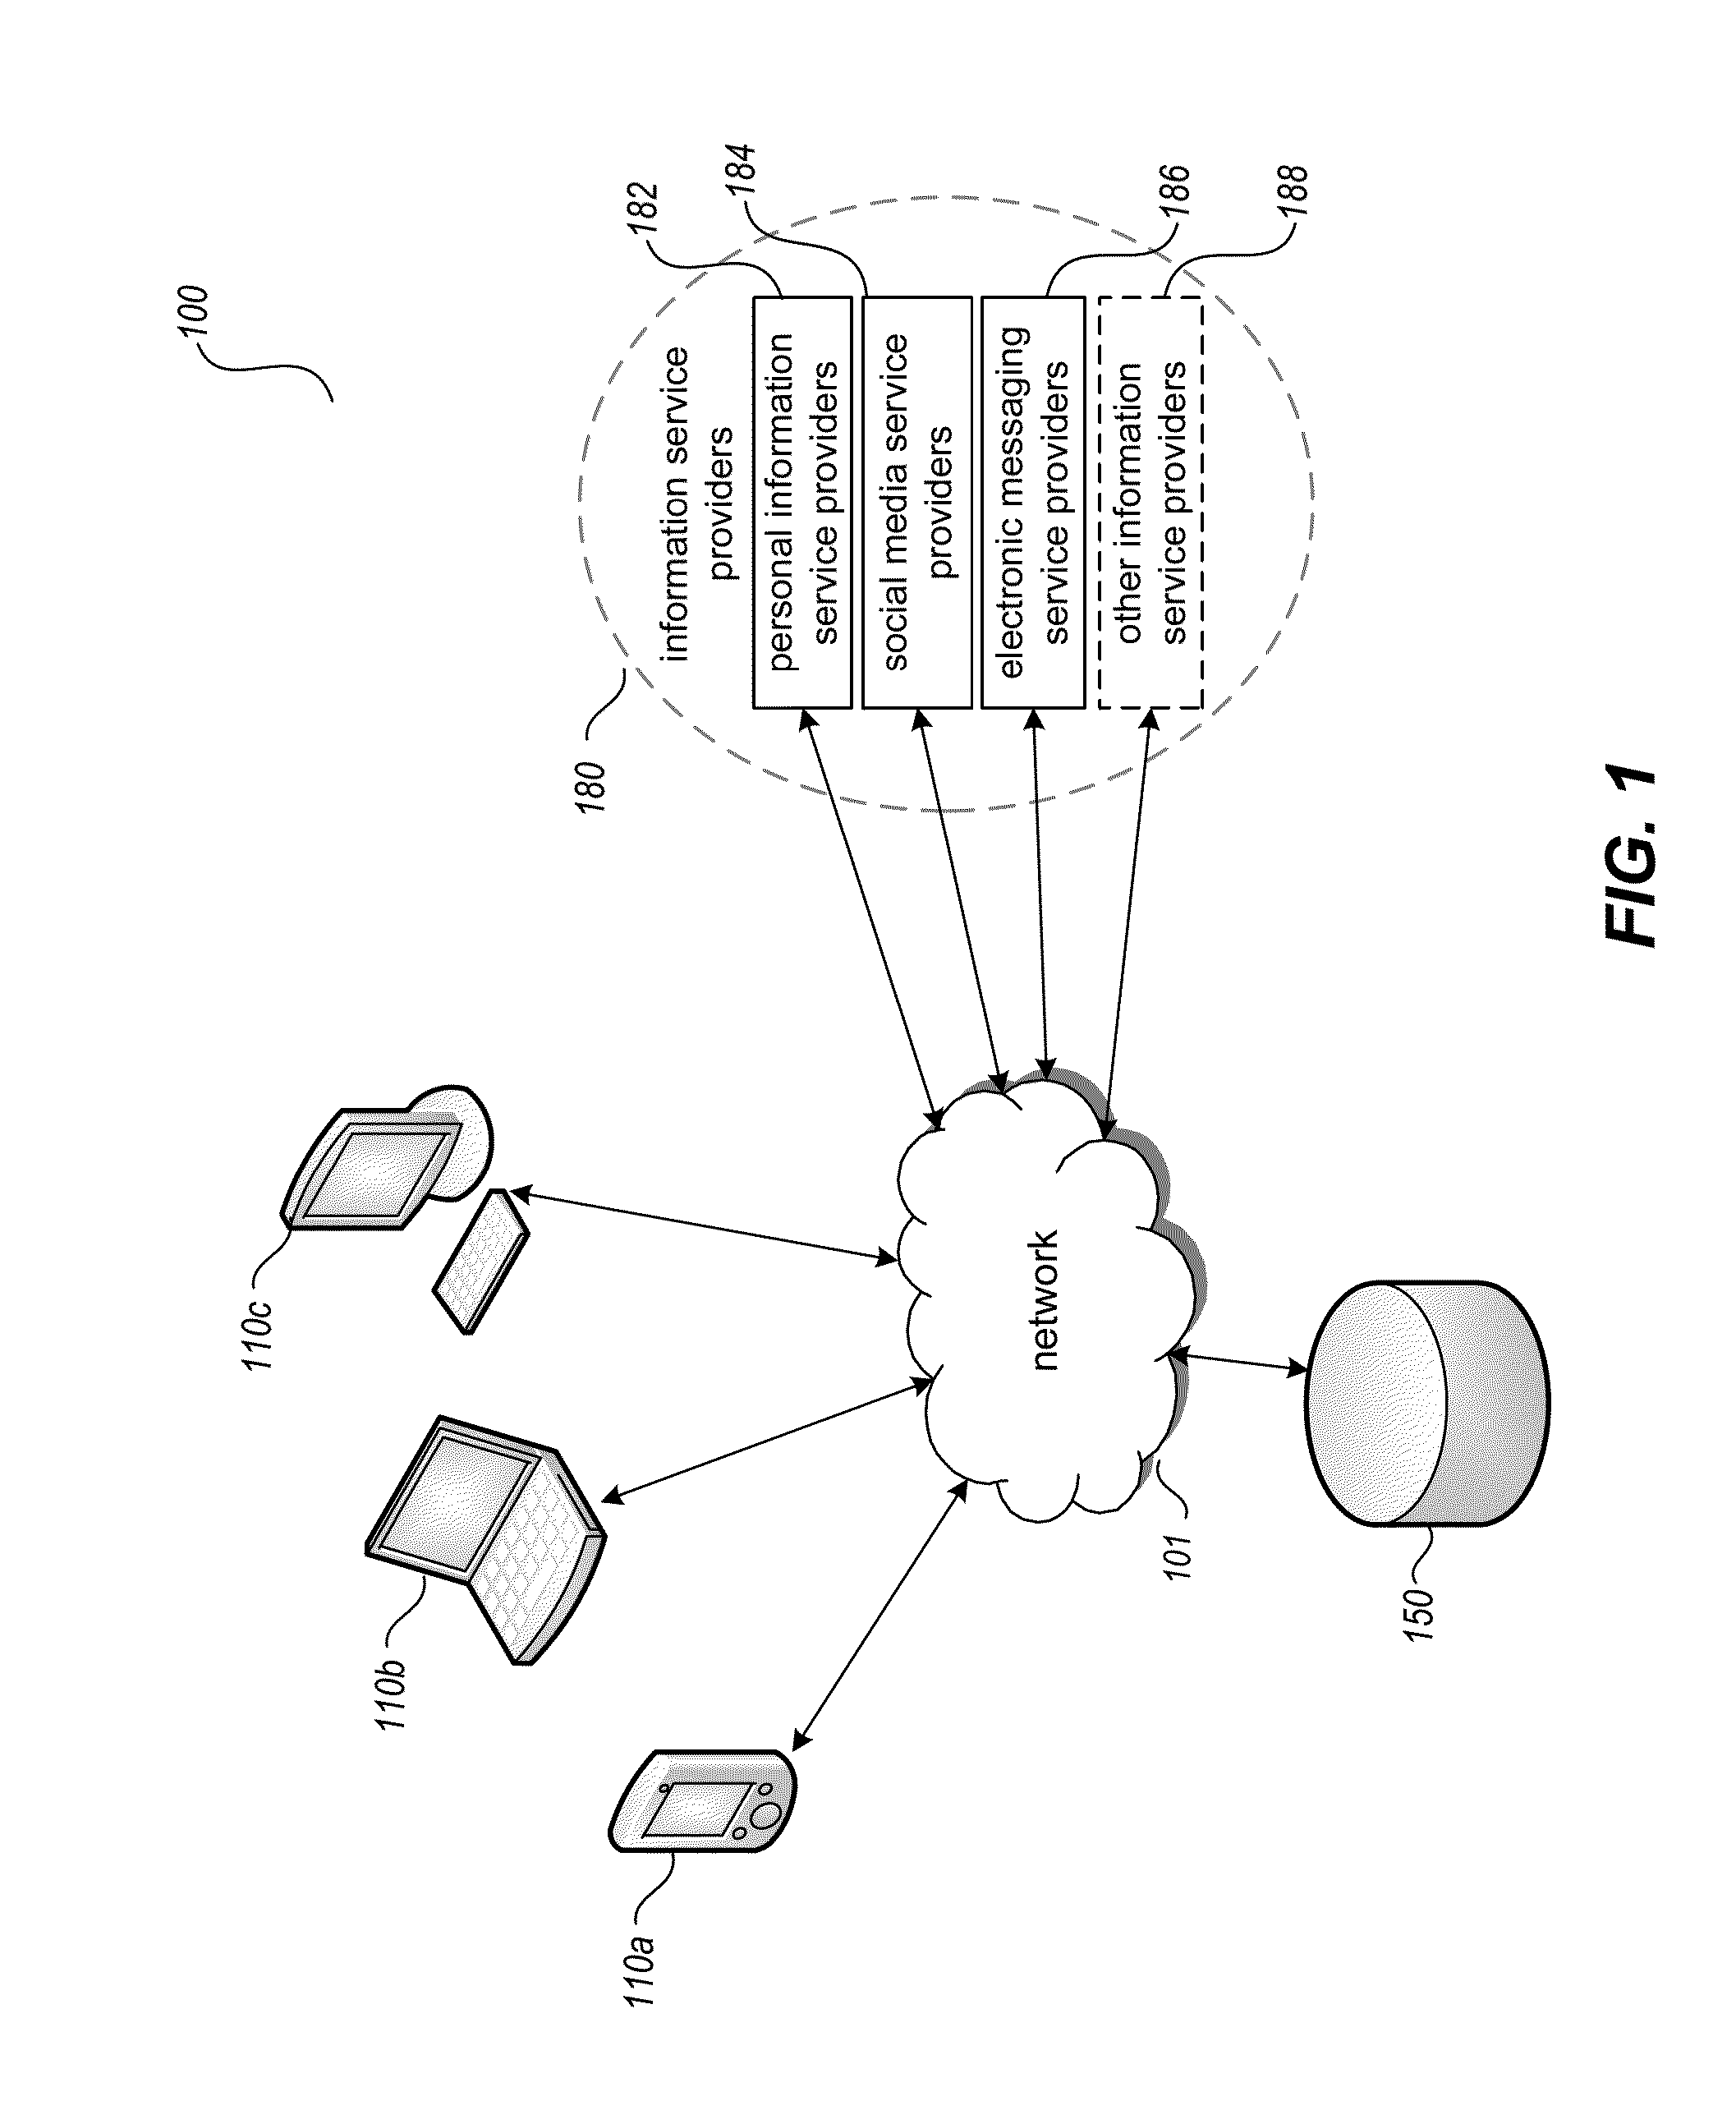 Aggregated information access and control using a personal unifying taxonomy